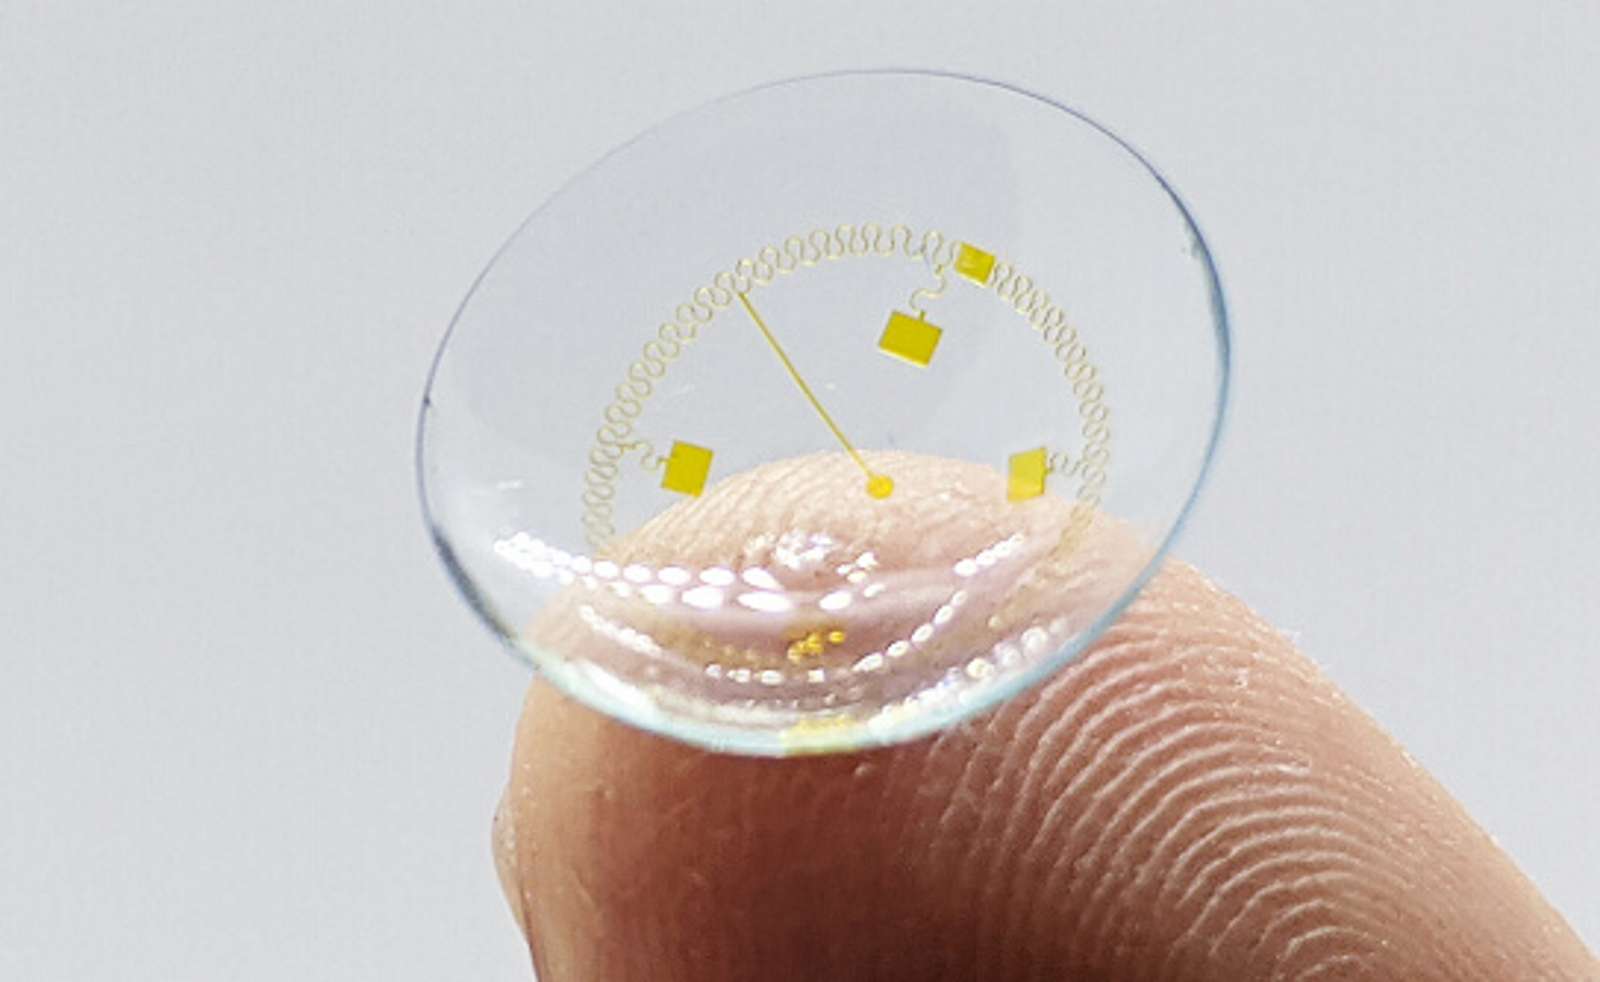 This contact lens displays notifications on your eye